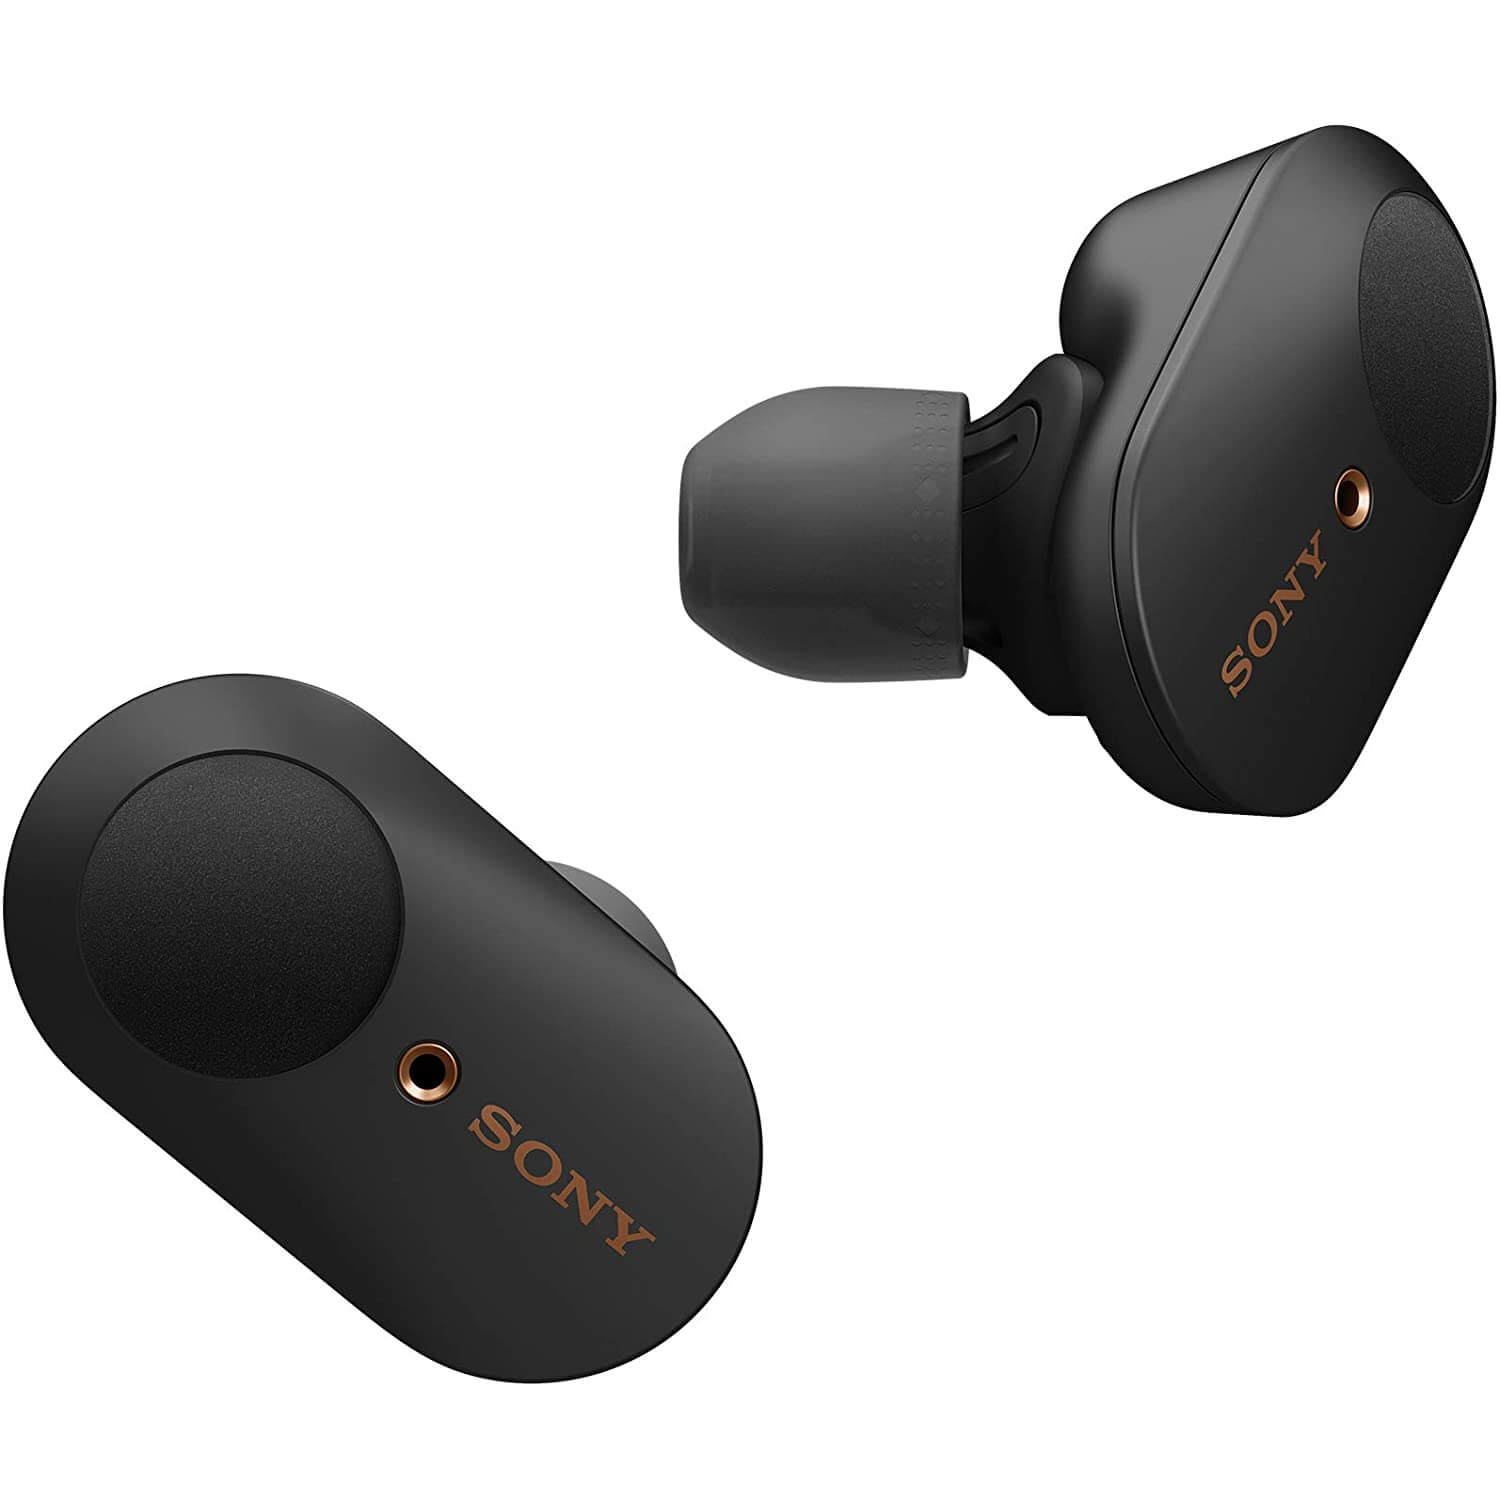 Sony WF-1000XM3 Industry Leading Active Noise Cancellation True Wireless (TWS) Bluetooth 5.0 Earbuds with 32hr Battery Life, Alexa Voice Control & mic for Phone Calls Suitable for Workout, WFH (Black)